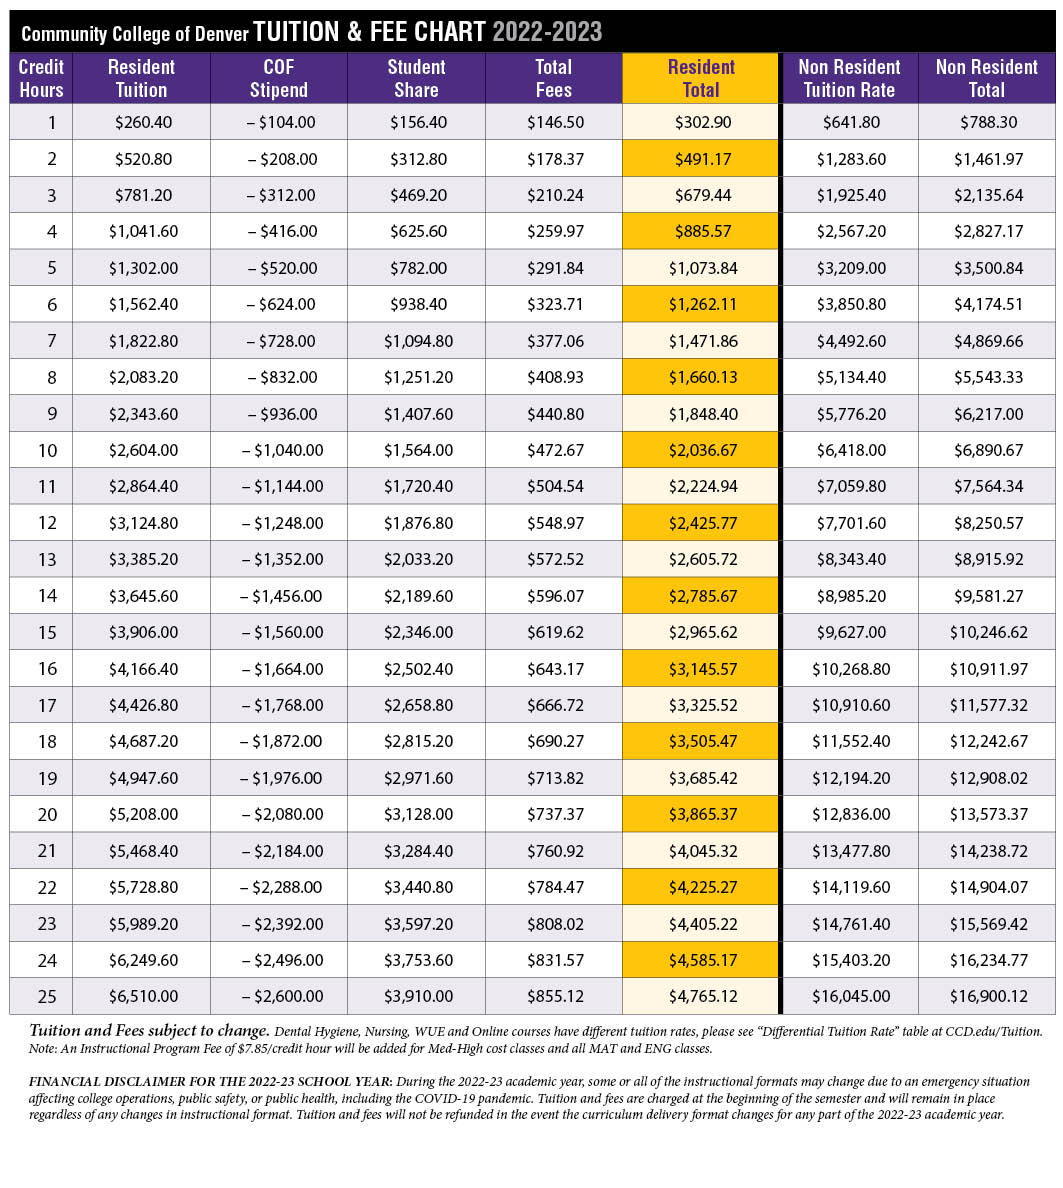 Table Showing Tuition and fees for 2022-2023